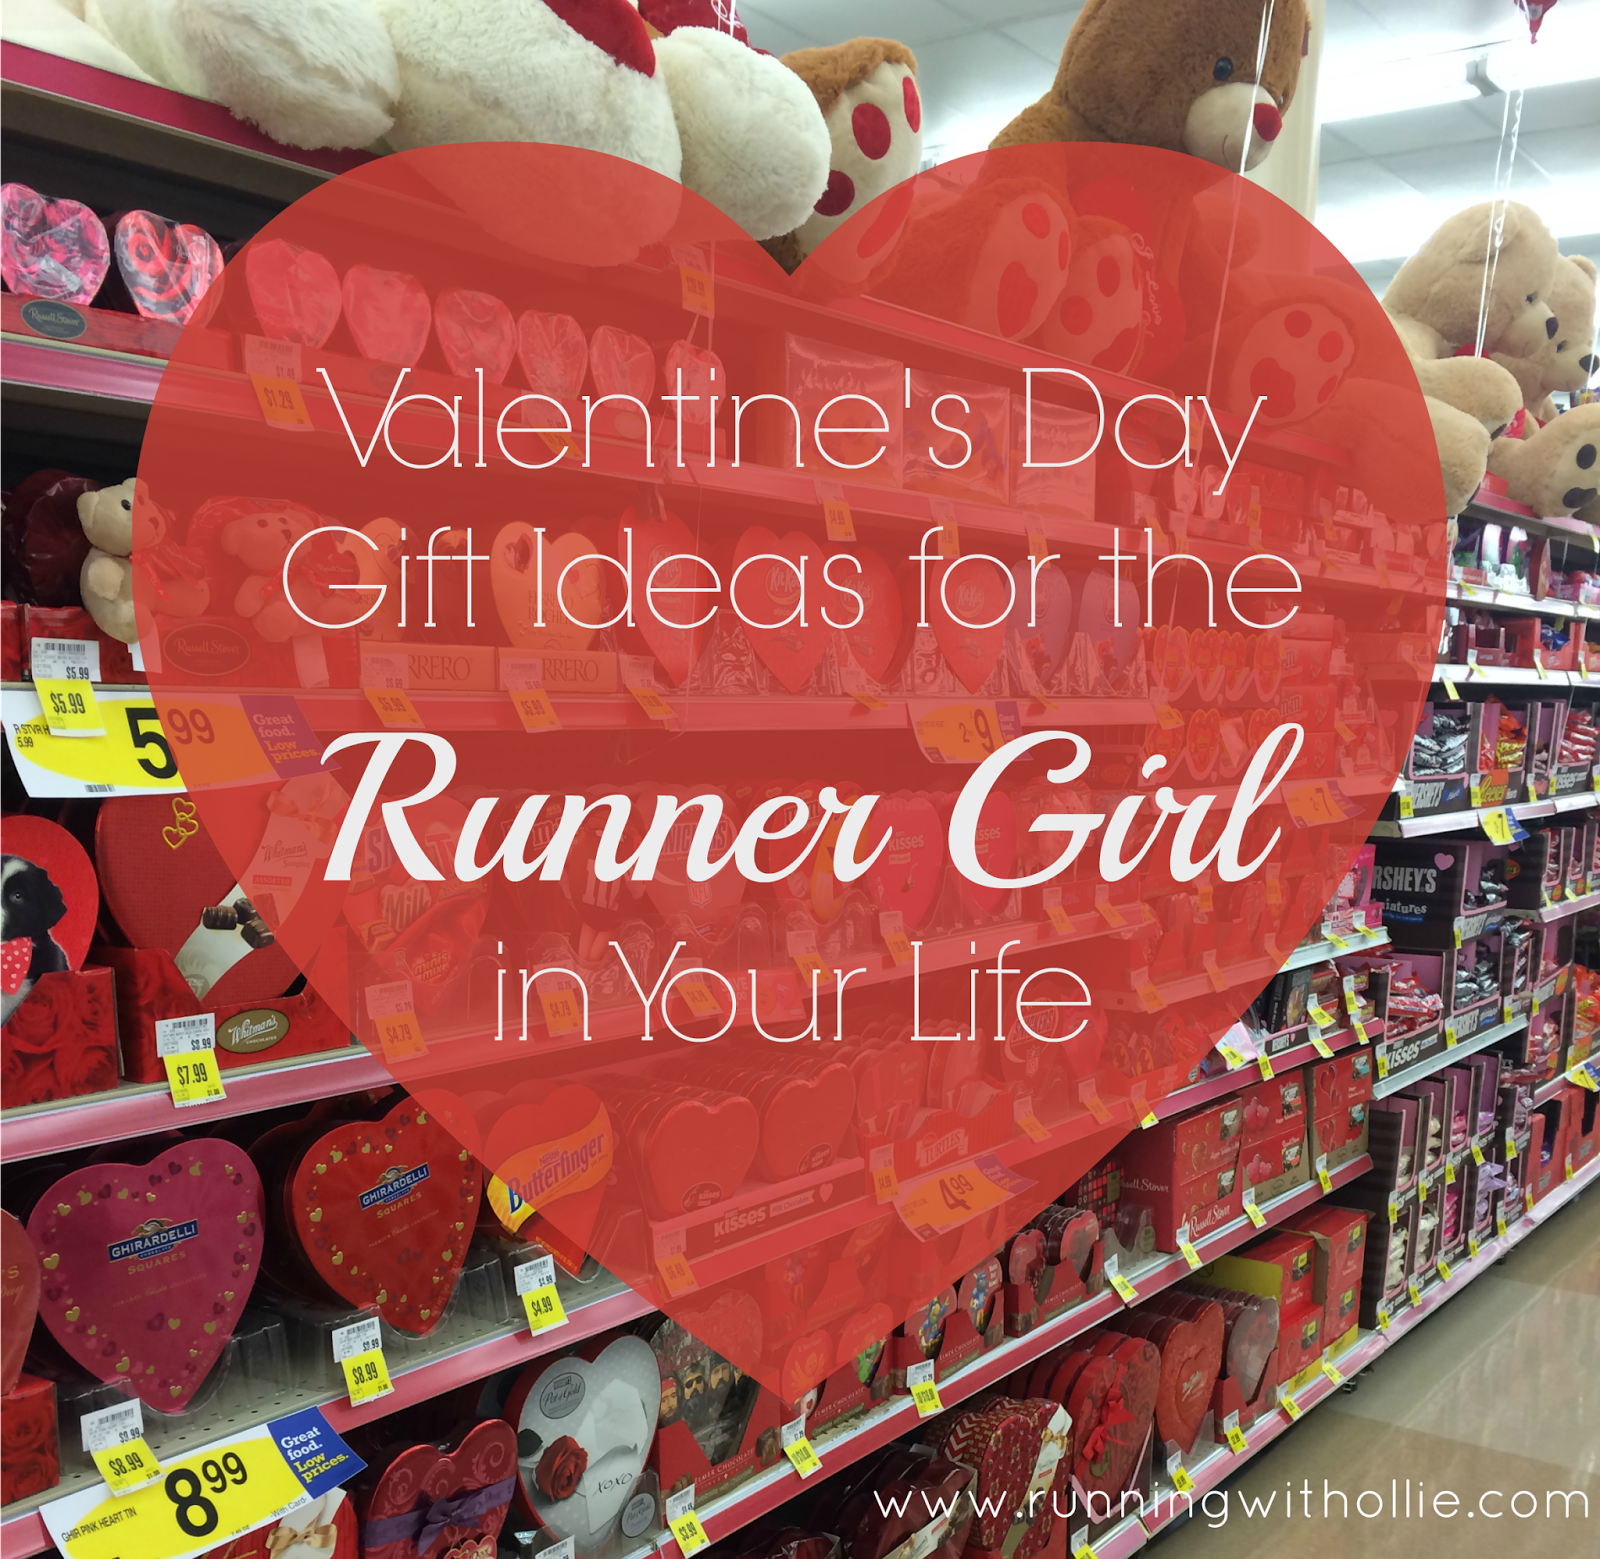 Valentine's Day Gift Ideas for the Runner Girl in Your Life